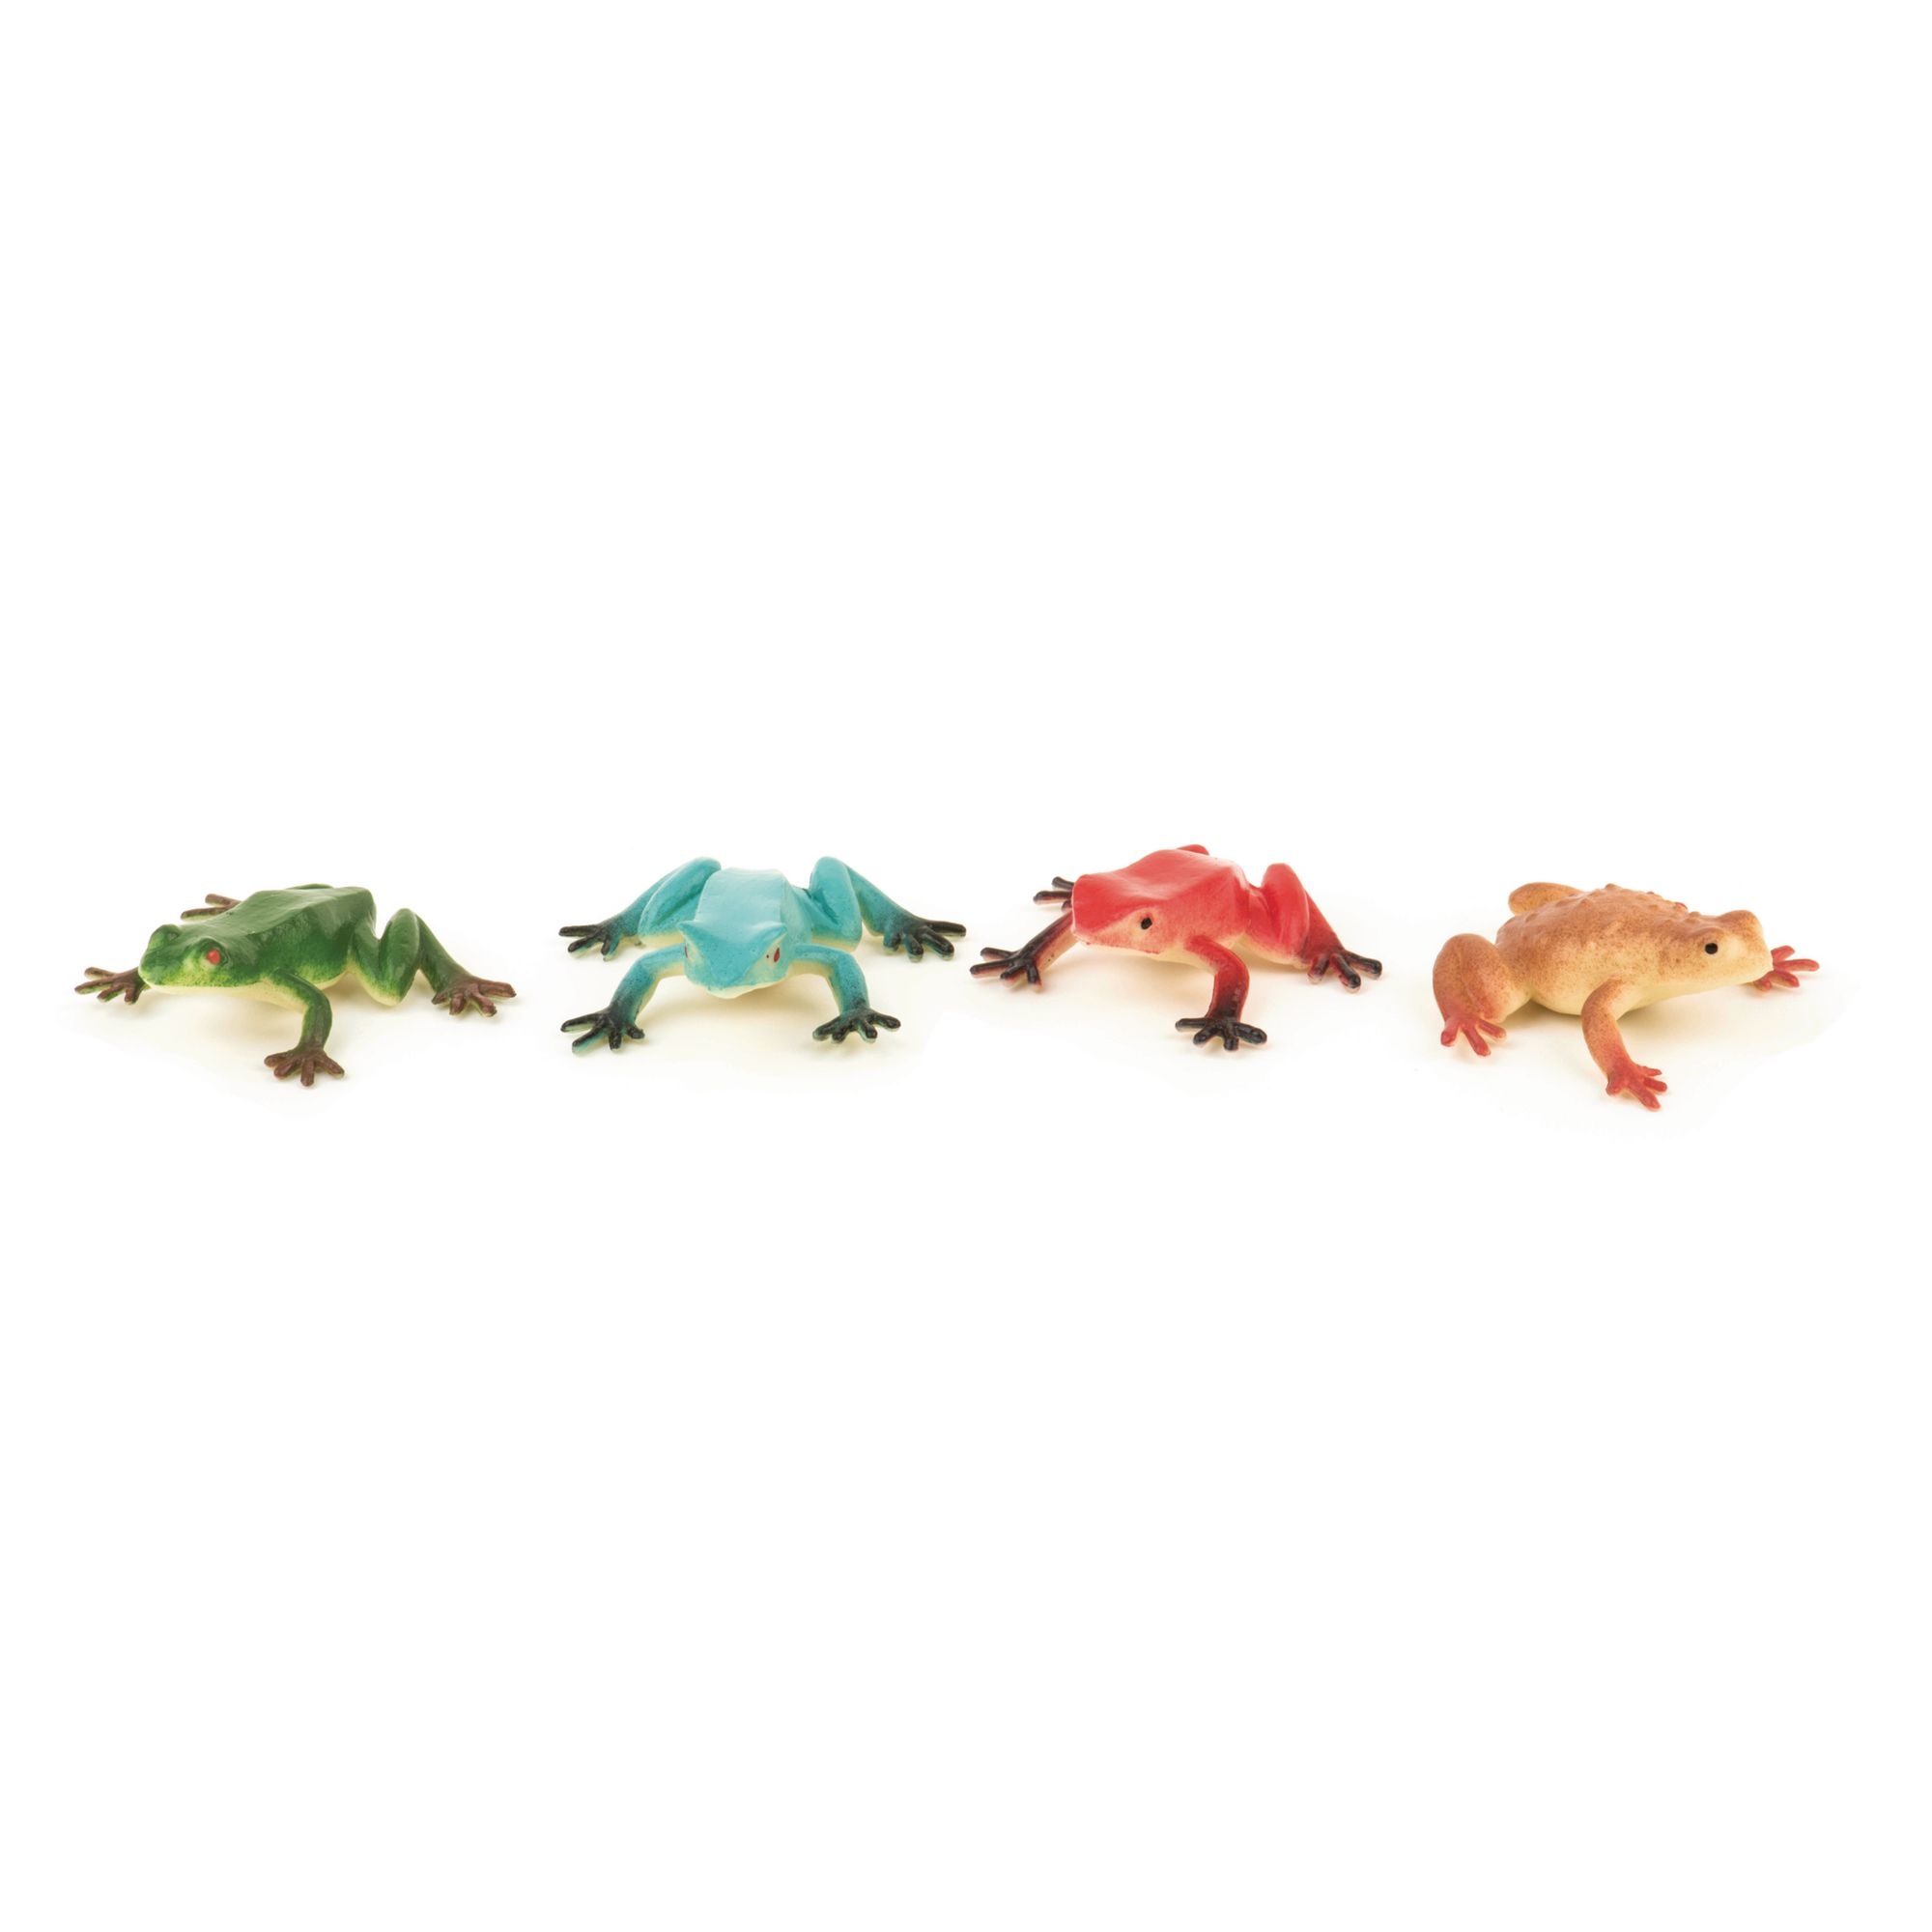 Terra by Battat Miniature Reptiles in a Tube - Pack of 60